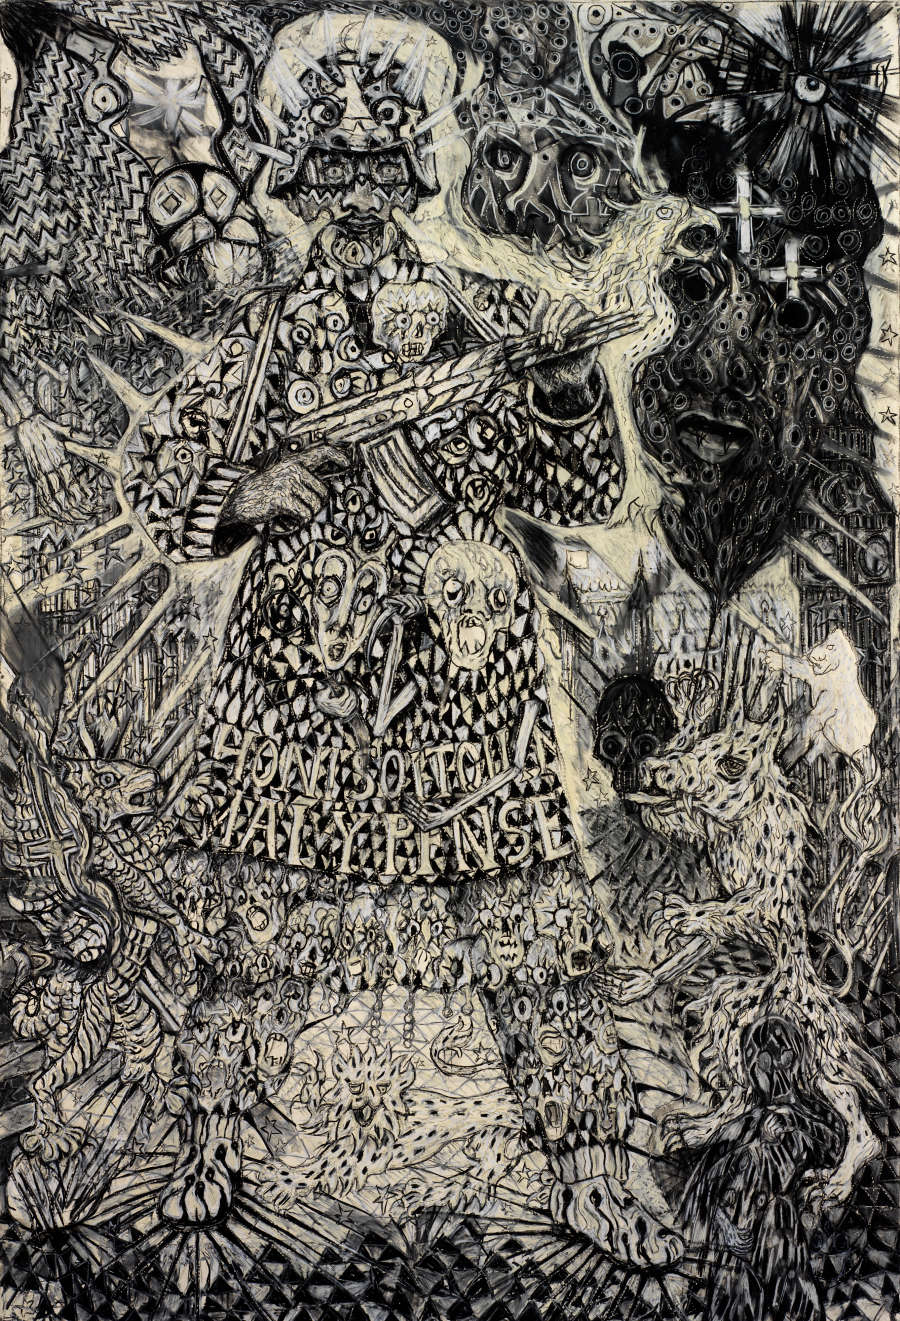 Full-length drawing of a soldier holding a gun. Behind and around him is a chaotic scene full of mythical and natural animals and faces and eyes.
